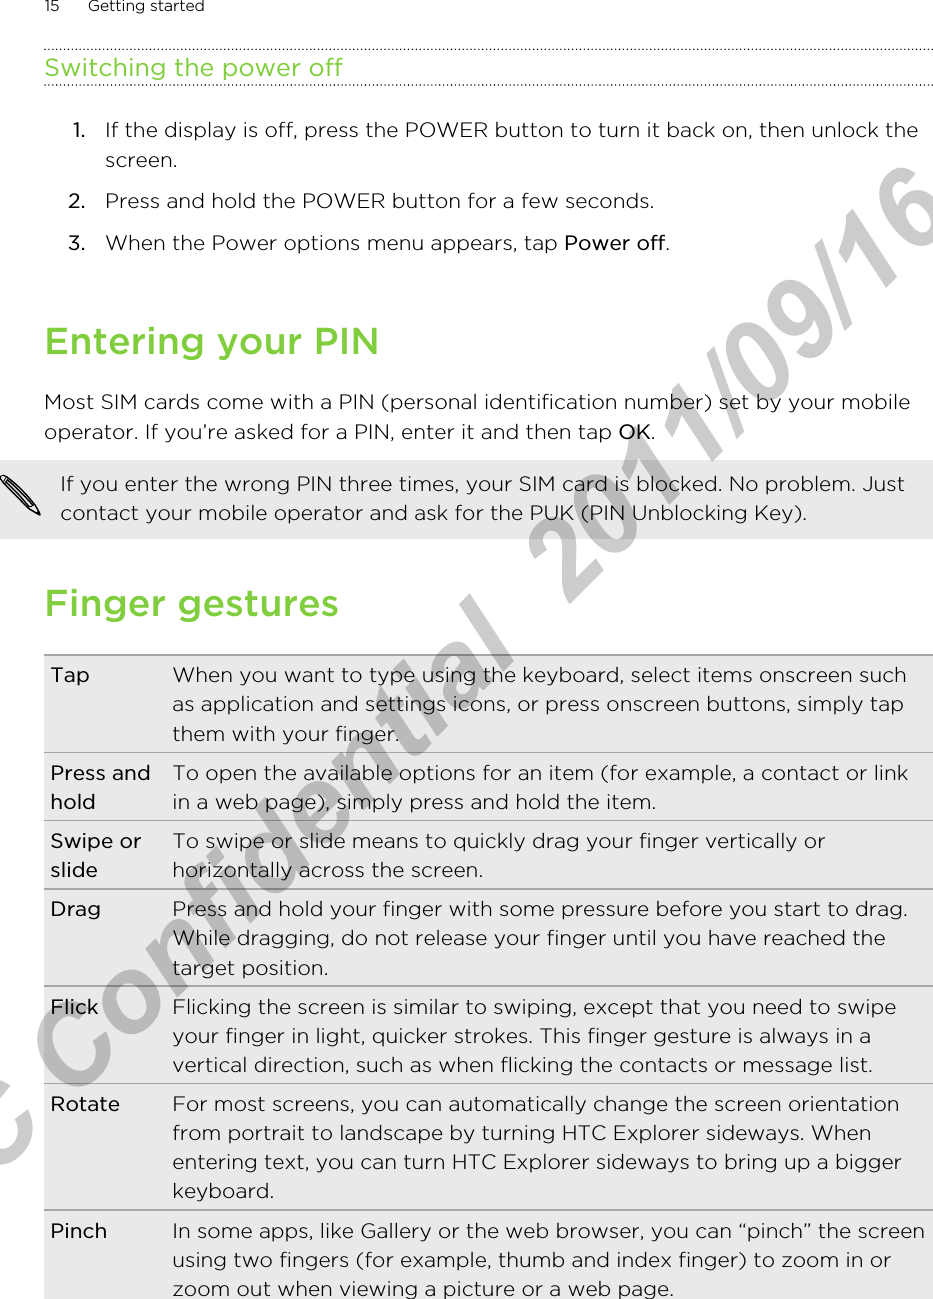 Switching the power off1. If the display is off, press the POWER button to turn it back on, then unlock thescreen.2. Press and hold the POWER button for a few seconds.3. When the Power options menu appears, tap Power off.Entering your PINMost SIM cards come with a PIN (personal identification number) set by your mobileoperator. If you’re asked for a PIN, enter it and then tap OK.If you enter the wrong PIN three times, your SIM card is blocked. No problem. Justcontact your mobile operator and ask for the PUK (PIN Unblocking Key).Finger gesturesTap When you want to type using the keyboard, select items onscreen suchas application and settings icons, or press onscreen buttons, simply tapthem with your finger.Press andholdTo open the available options for an item (for example, a contact or linkin a web page), simply press and hold the item.Swipe orslideTo swipe or slide means to quickly drag your finger vertically orhorizontally across the screen.Drag Press and hold your finger with some pressure before you start to drag.While dragging, do not release your finger until you have reached thetarget position.Flick Flicking the screen is similar to swiping, except that you need to swipeyour finger in light, quicker strokes. This finger gesture is always in avertical direction, such as when flicking the contacts or message list.Rotate For most screens, you can automatically change the screen orientationfrom portrait to landscape by turning HTC Explorer sideways. Whenentering text, you can turn HTC Explorer sideways to bring up a biggerkeyboard.Pinch In some apps, like Gallery or the web browser, you can “pinch” the screenusing two fingers (for example, thumb and index finger) to zoom in orzoom out when viewing a picture or a web page.15 Getting startedHTC Confidential  2011/09/16 